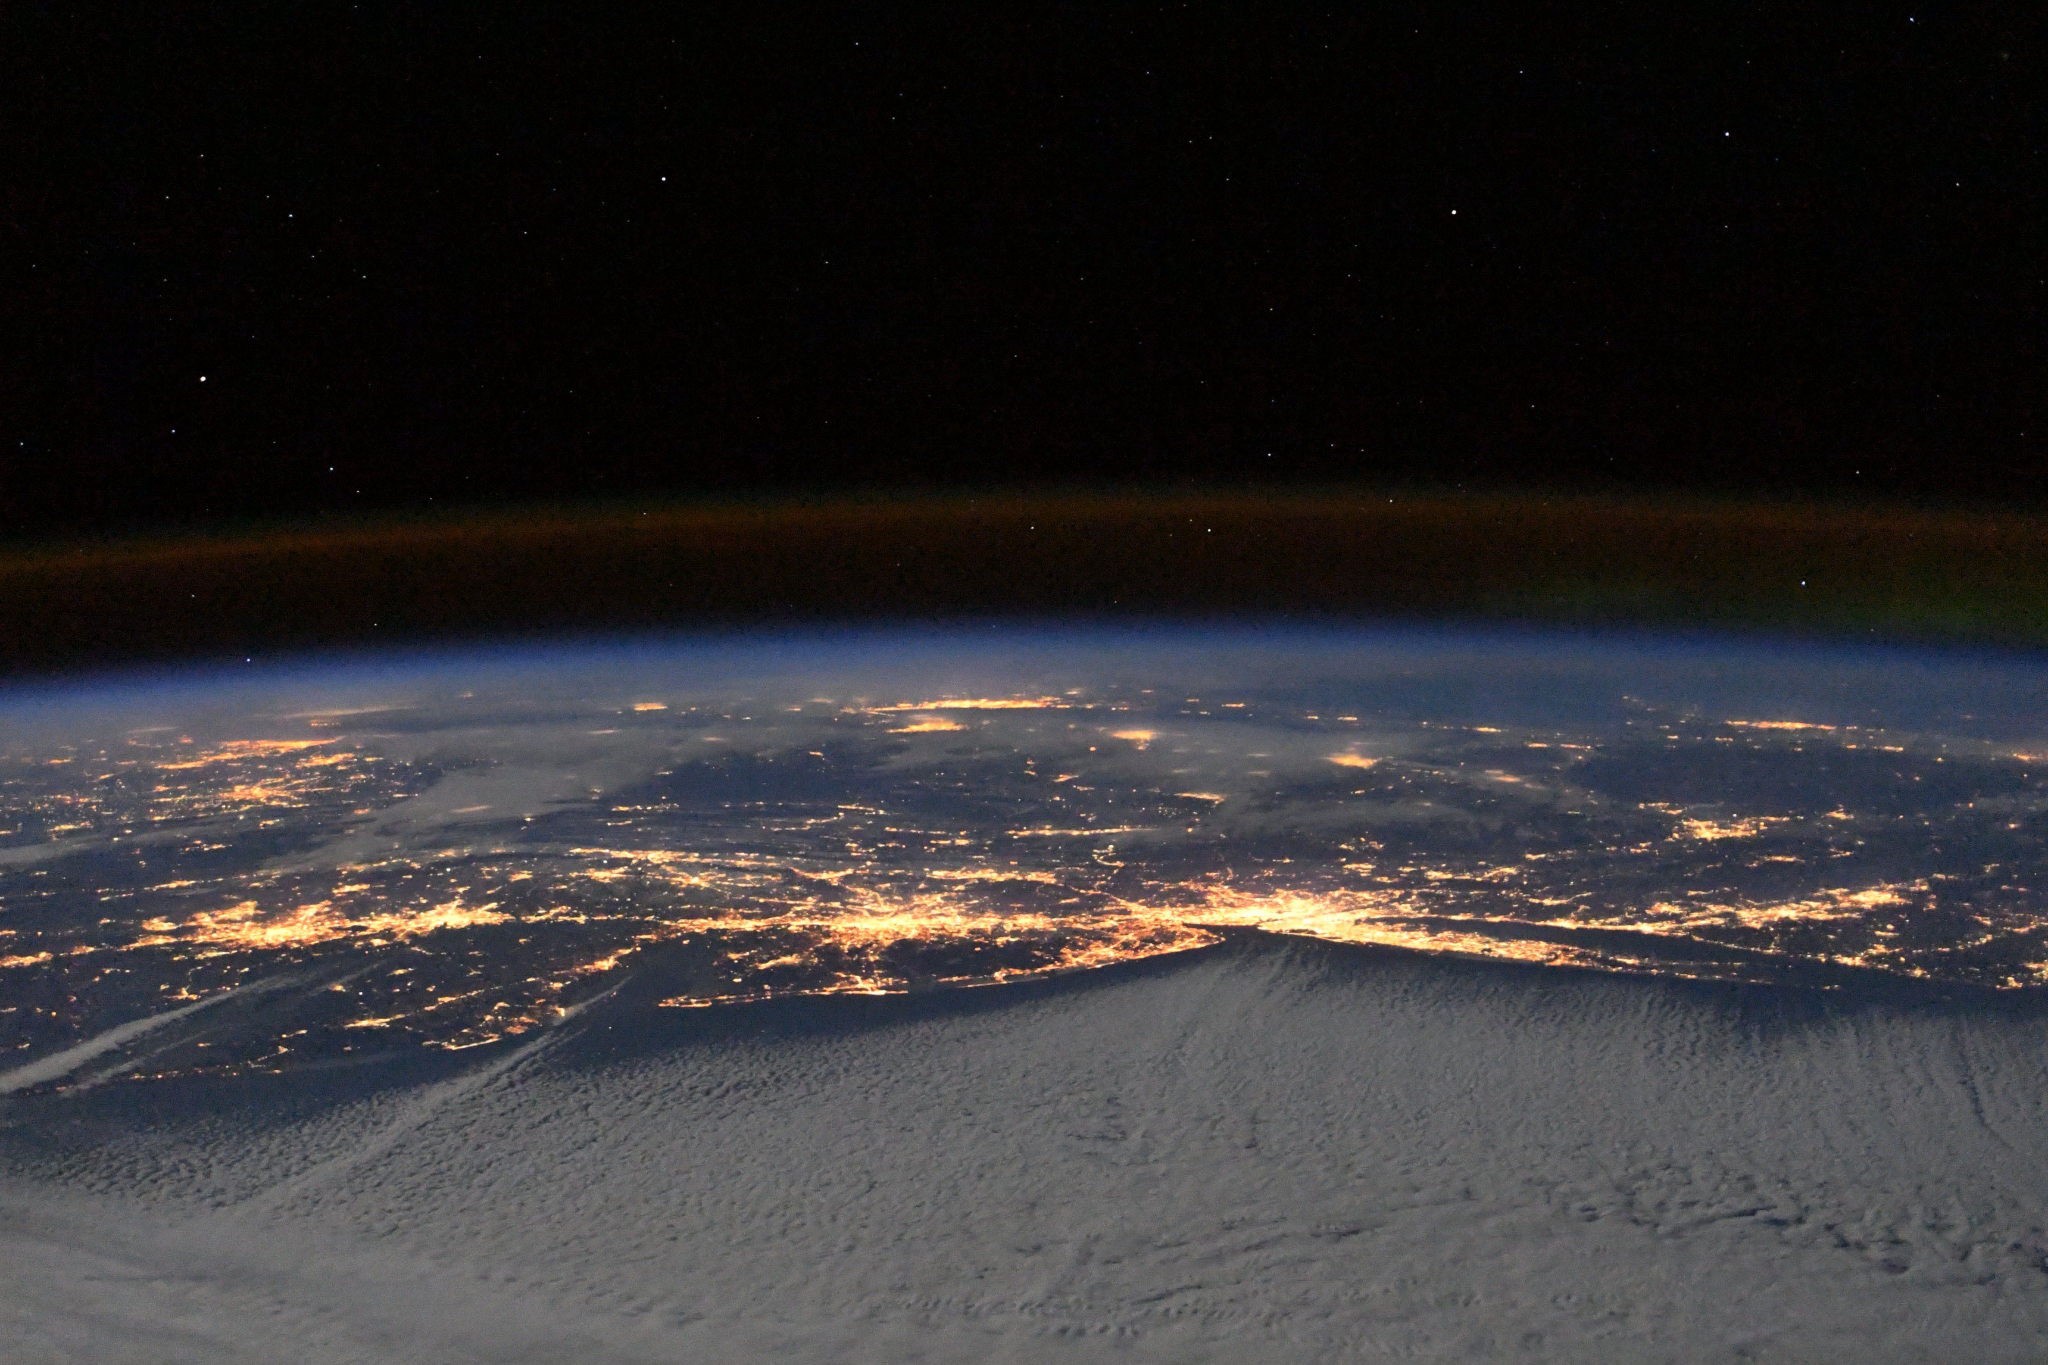 The east coast of the United States from the International Space Station